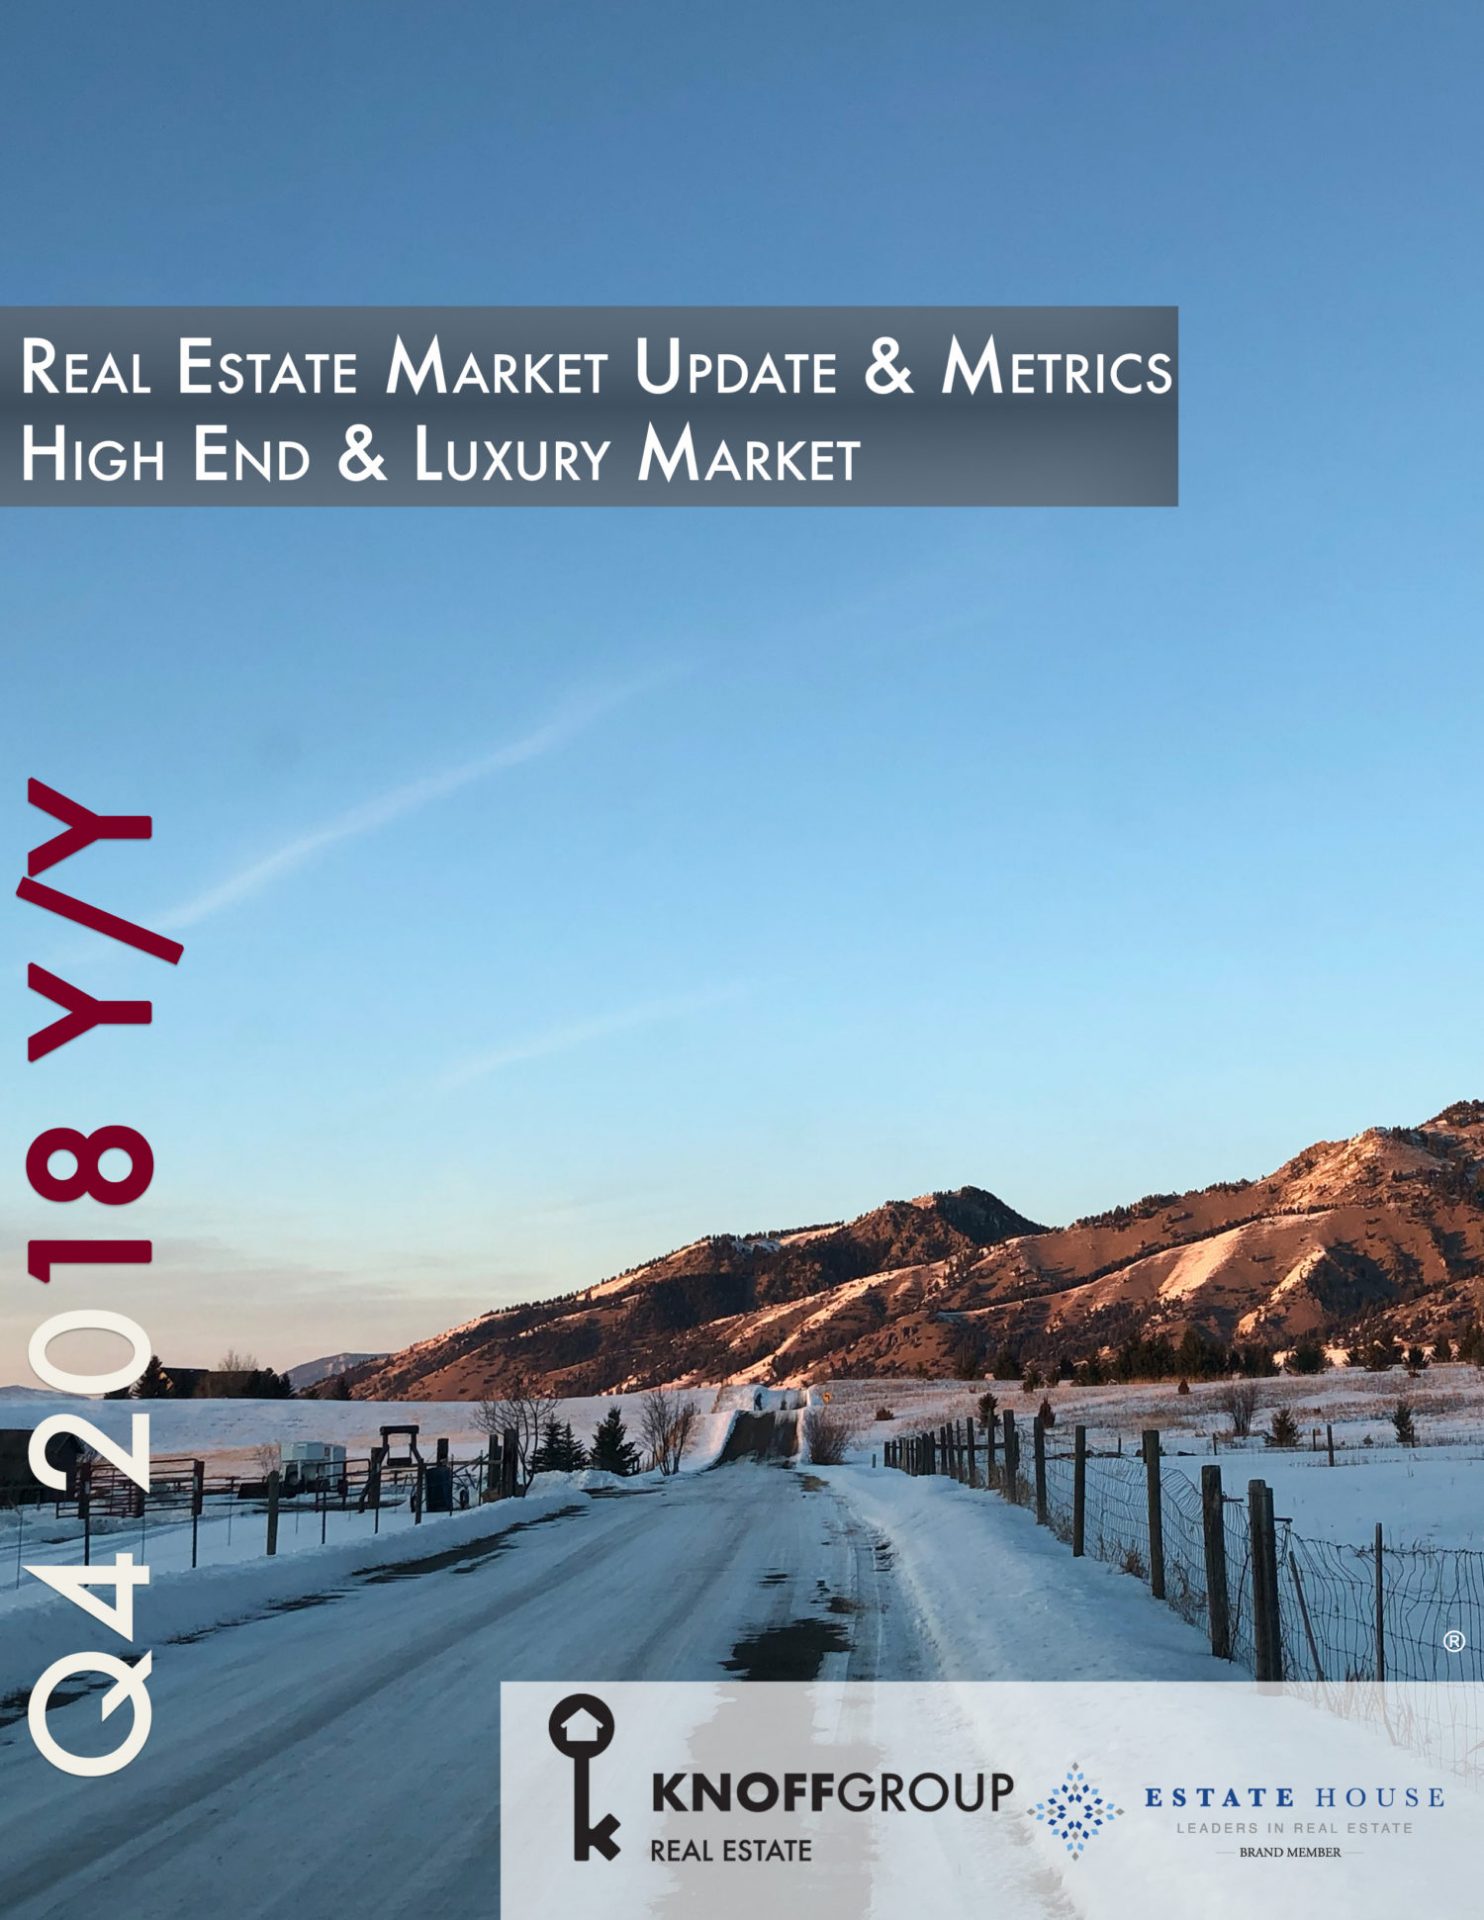 Q4 Luxury and High End Real Estate Market Update and Metrics 2016-2018